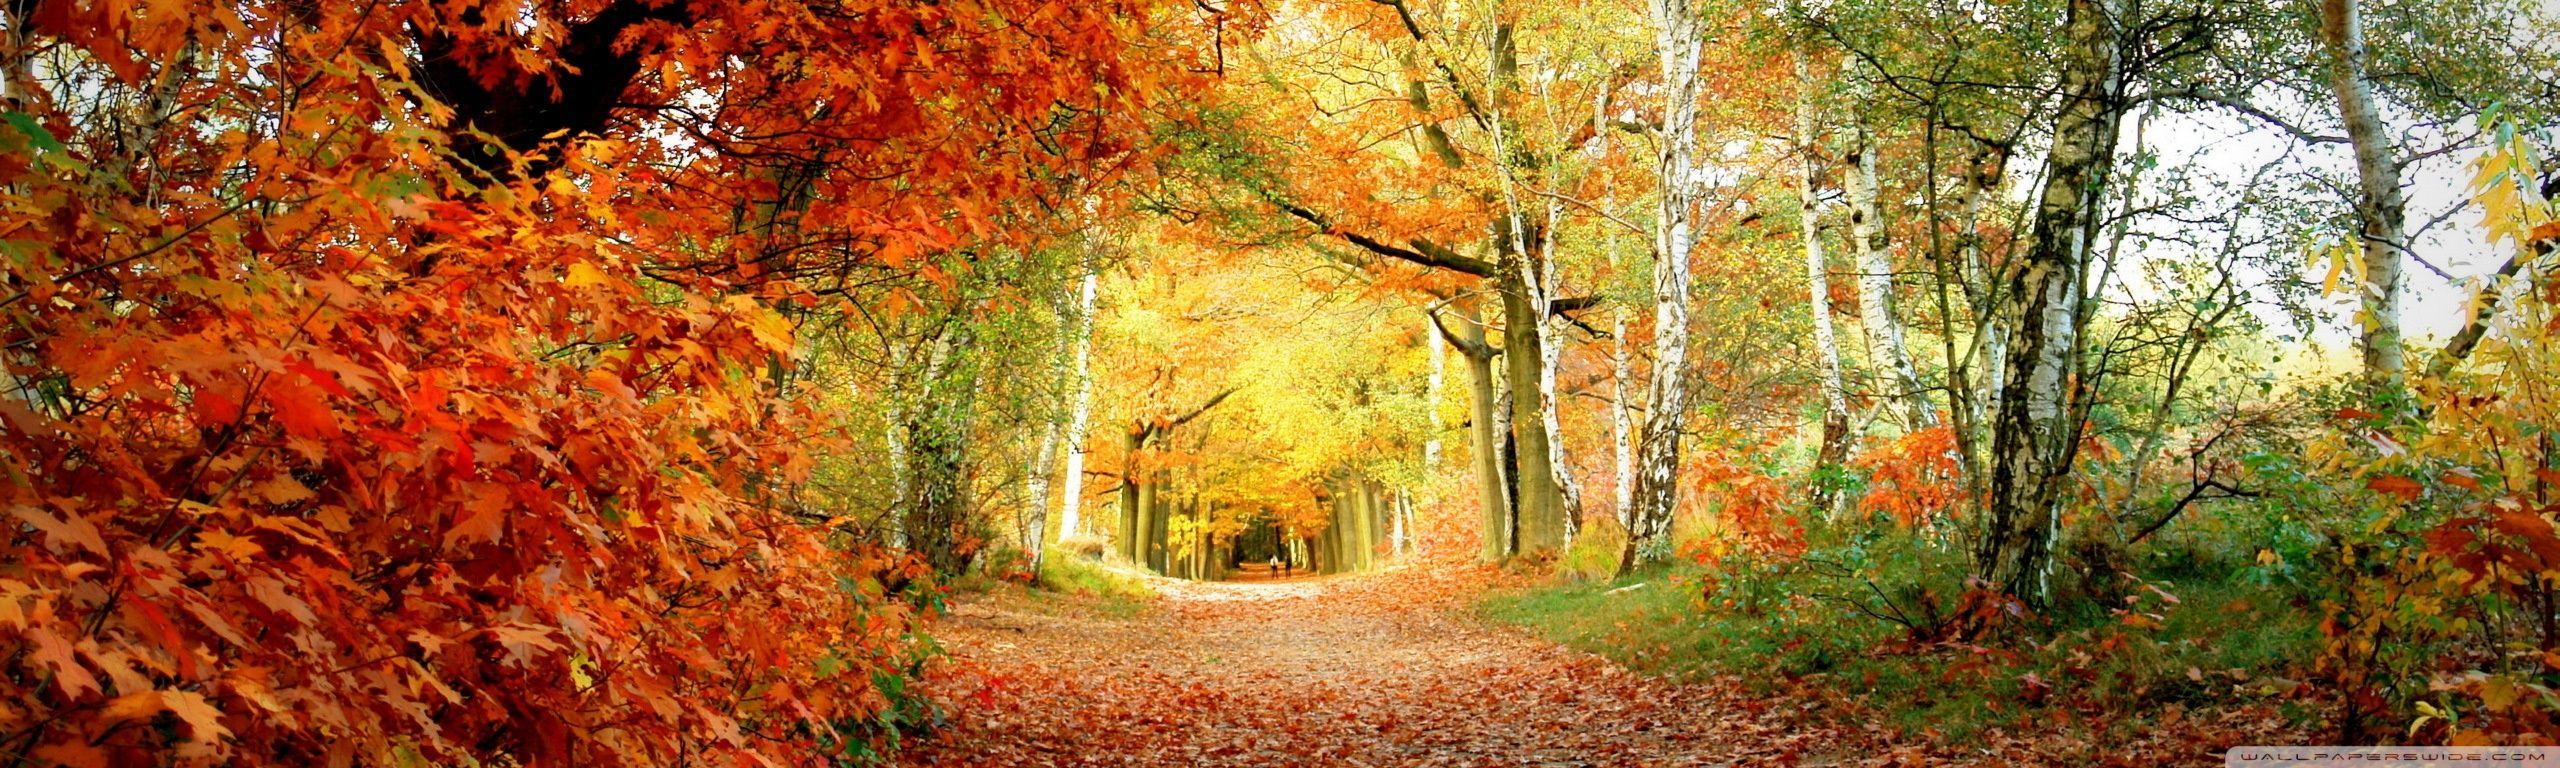 Autumn Dual Monitor Wallpapers - Wallpaper Cave